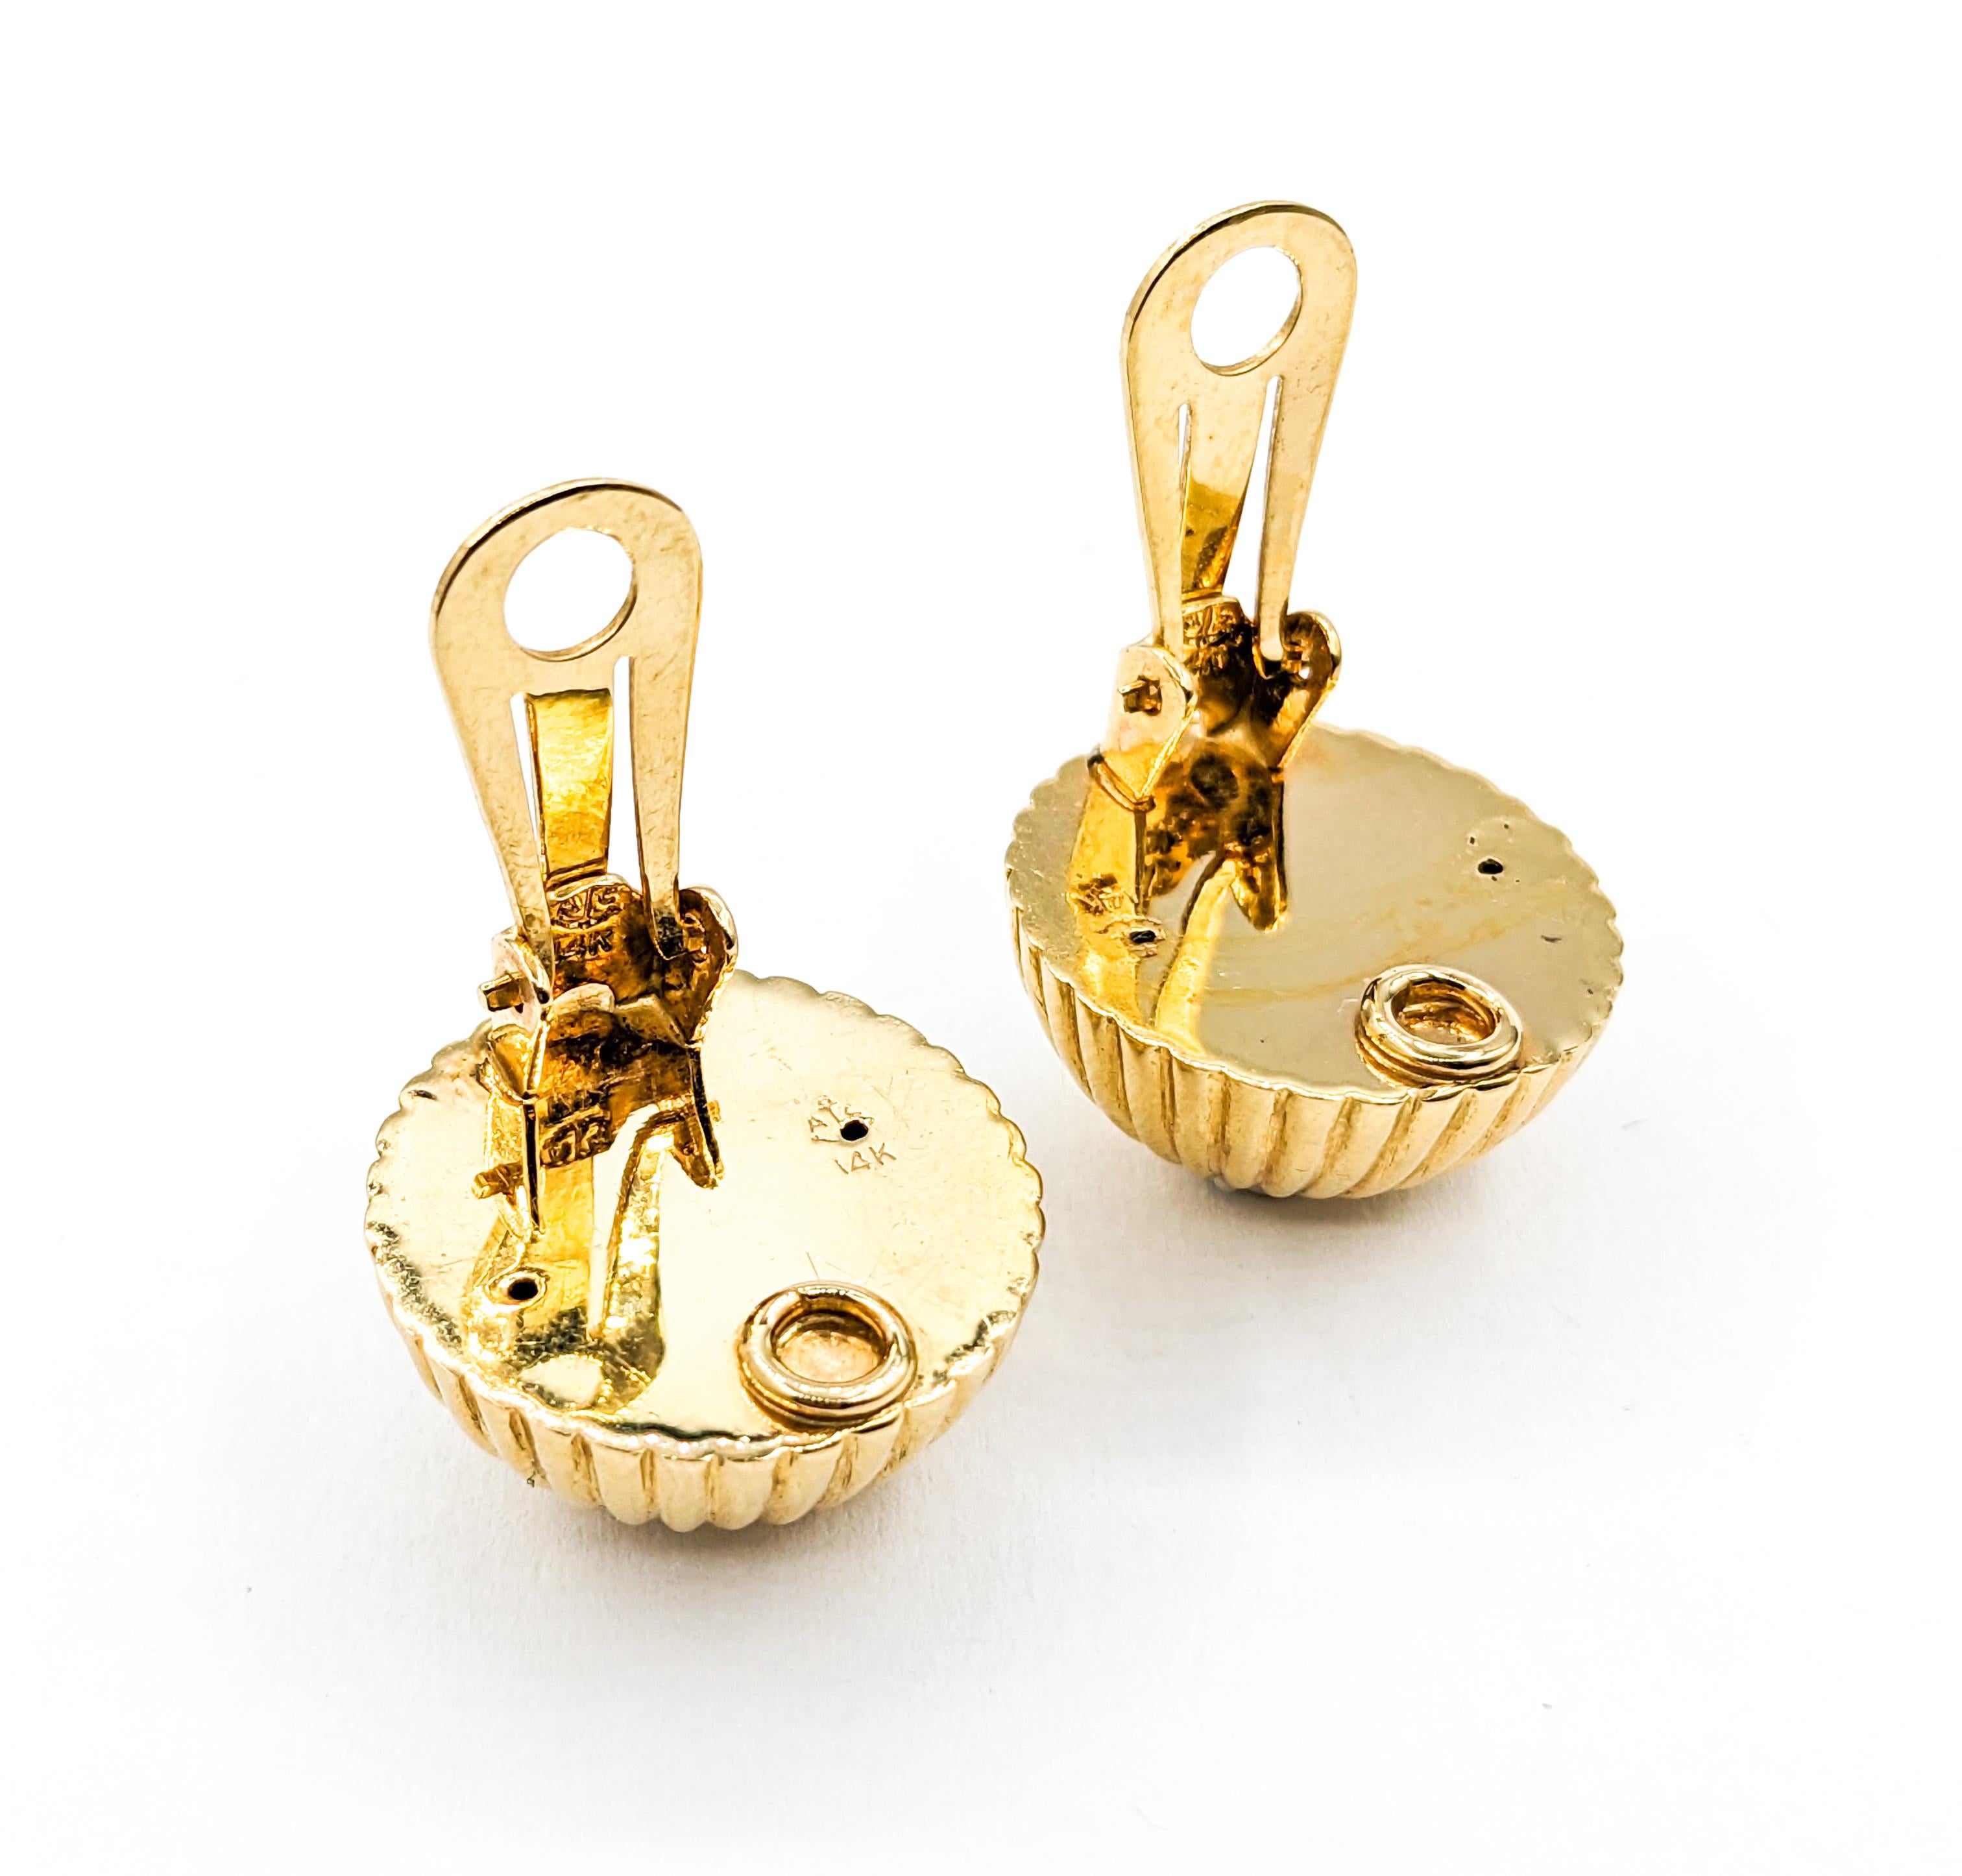 Vintage Ribbed Dome Clip On Earrings

Introducing our chic clip-on earrings, a harmonious blend of tradition and style. Expertly crafted in 14k yellow gold, these earrings boast a distinctive ribbed design, adding layers of texture and dimension.